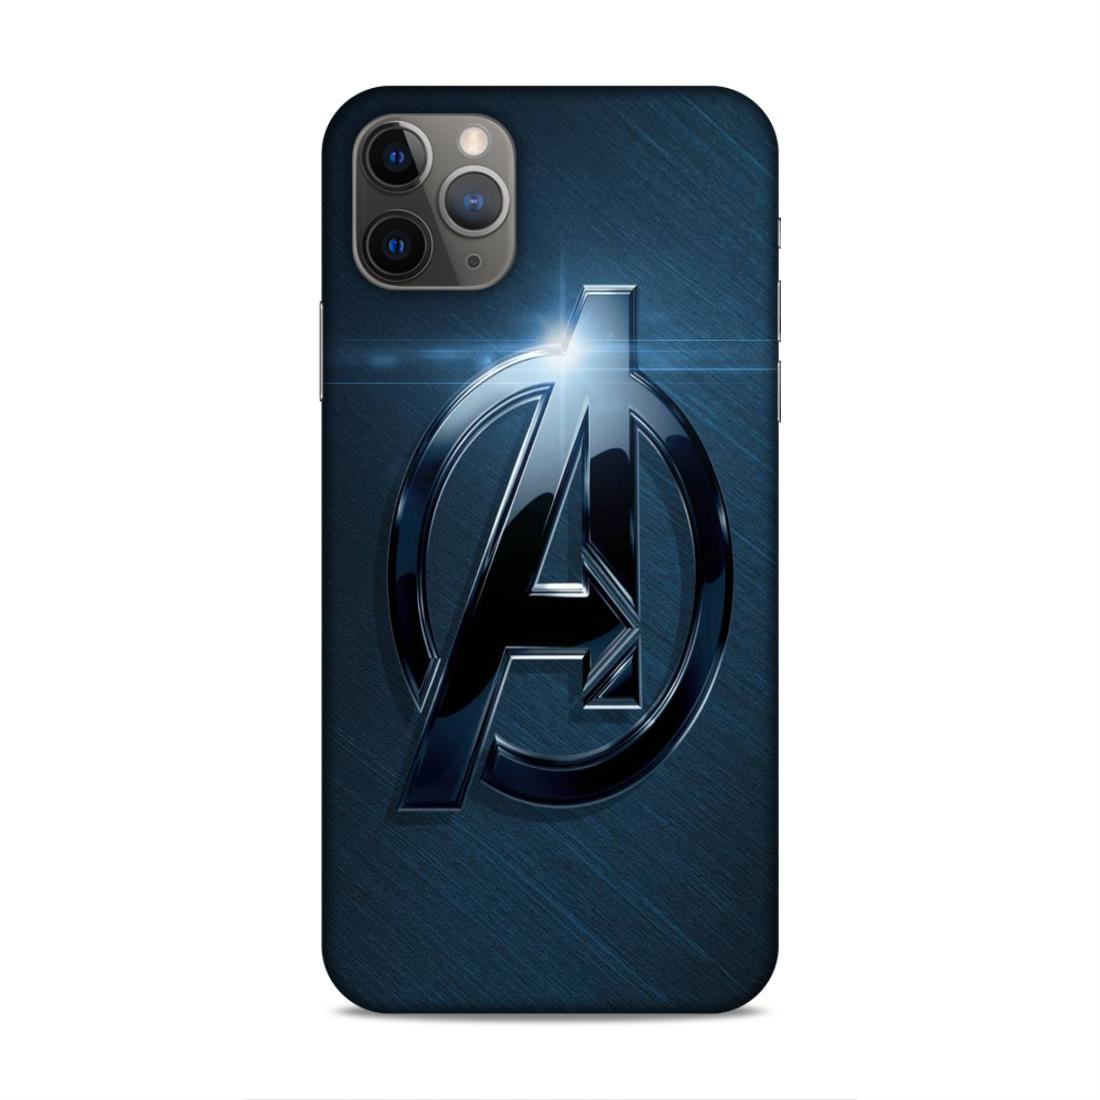 Avengers Hard Back Case For Apple iPhone 11 Pro Max